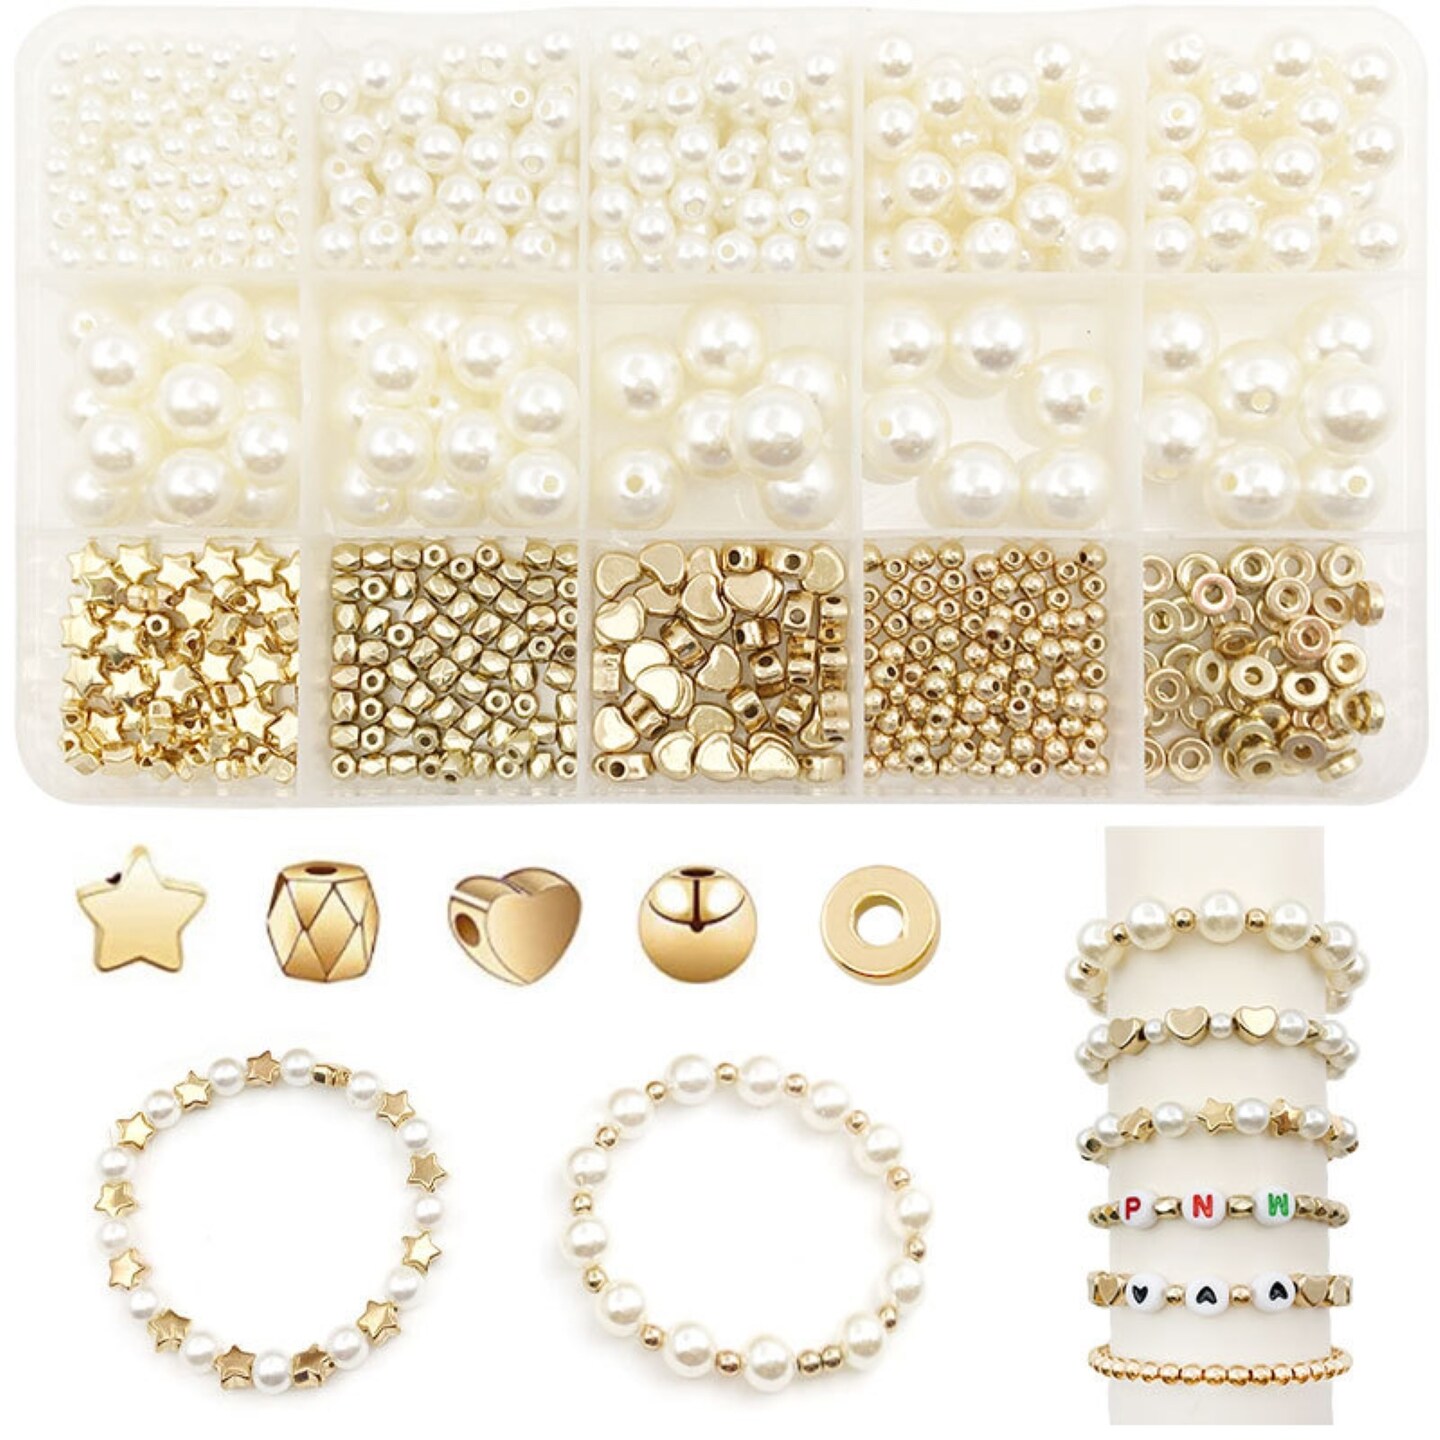 Generic 1 Set Loose Beads Eye-catching Smooth Surface Resin Jewelry Beads Bracelet Necklace Accessories Set for Home